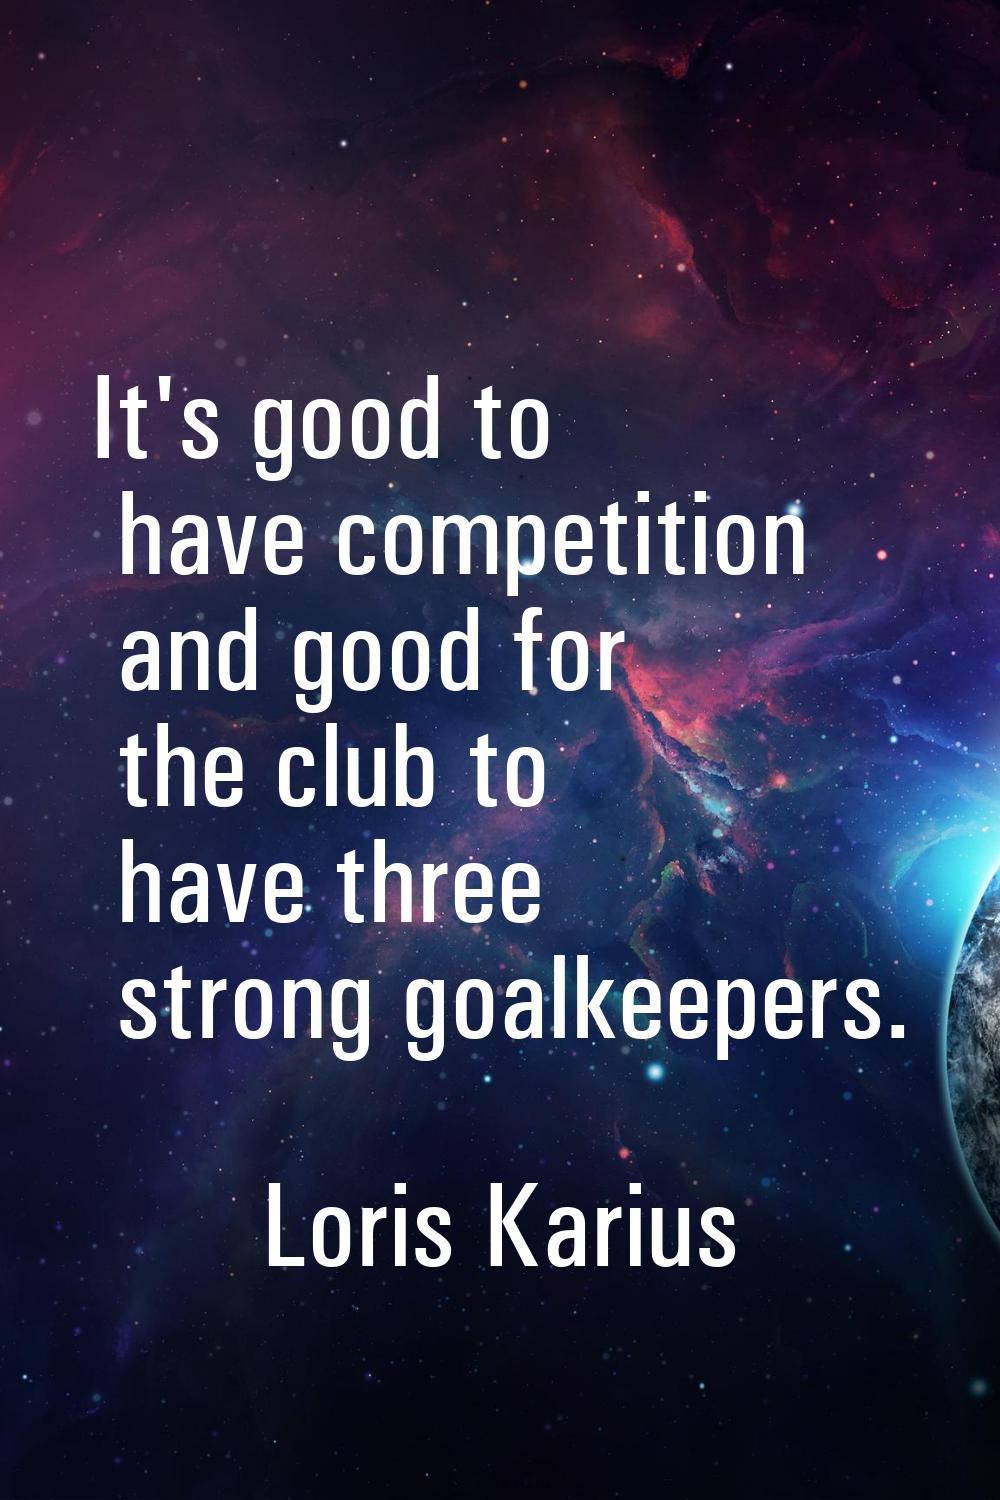 It's good to have competition and good for the club to have three strong goalkeepers.